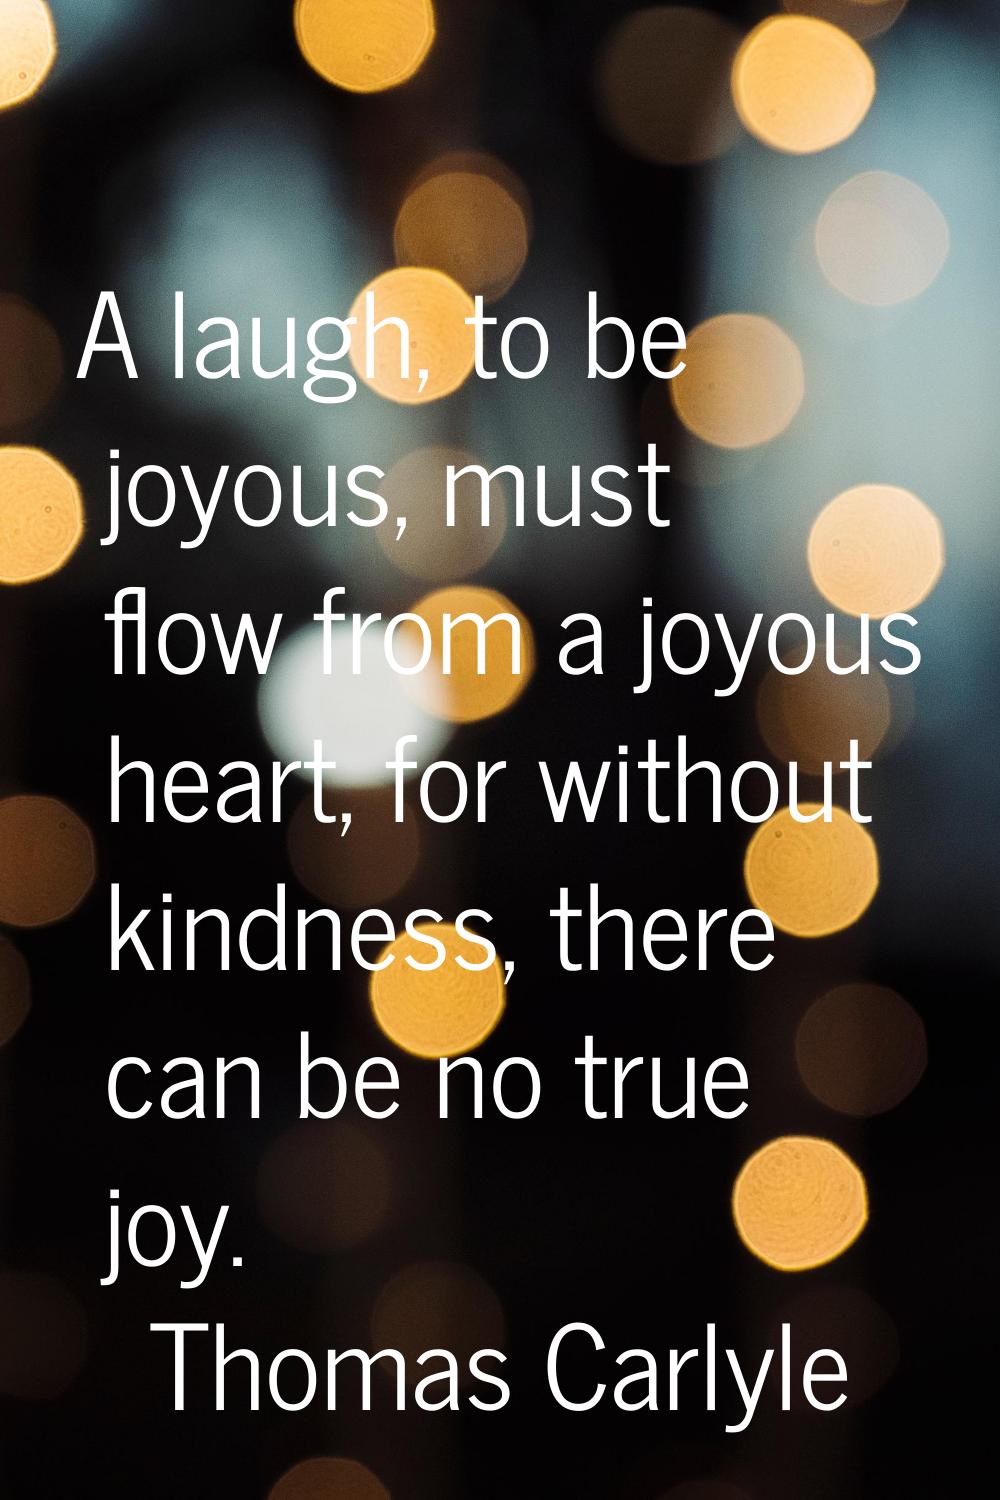 A laugh, to be joyous, must flow from a joyous heart, for without kindness, there can be no true jo